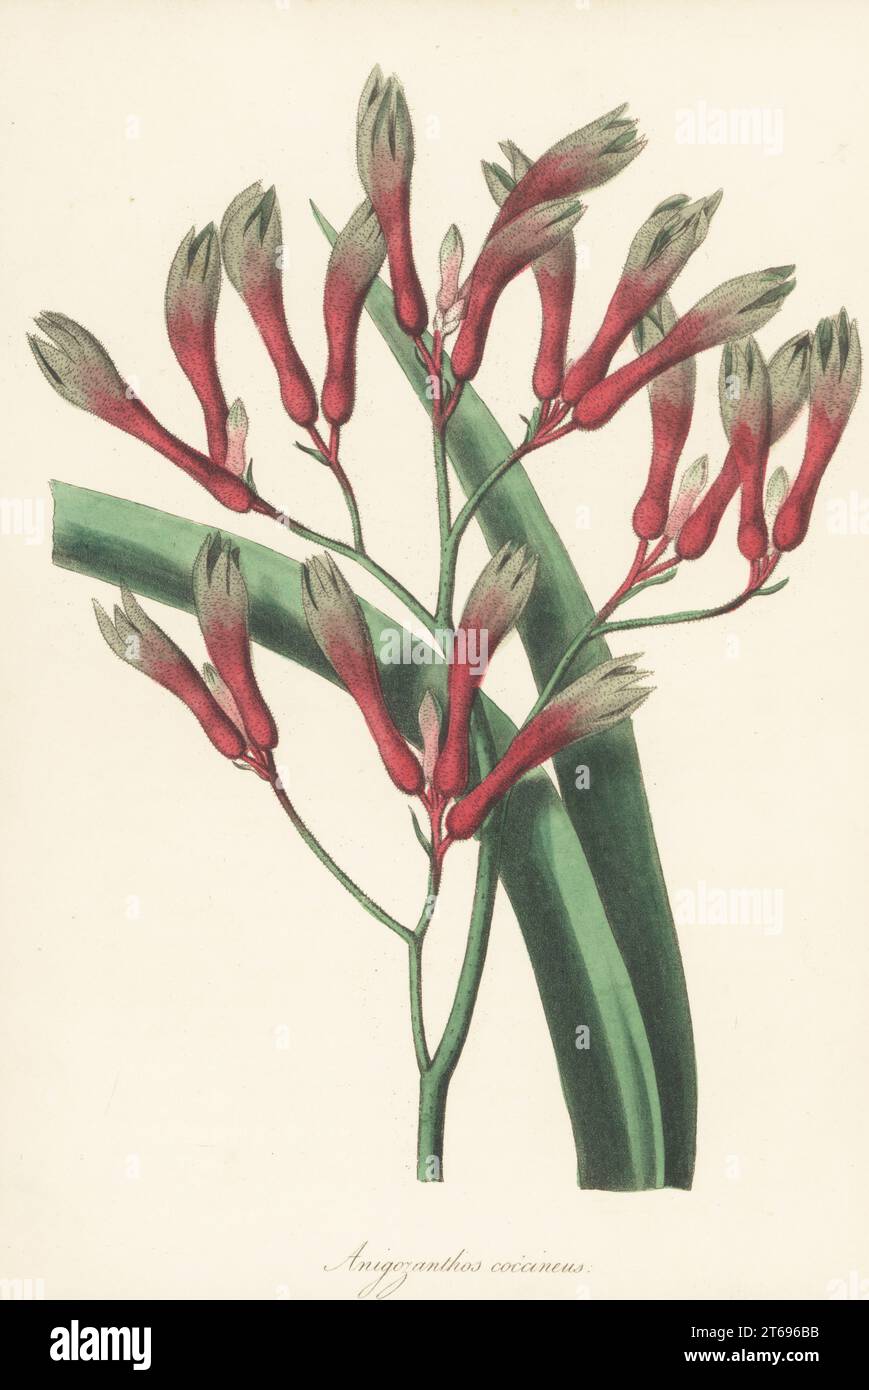 Tall, yellow or evergreen kangaroo paw, Anigozanthos flavidus. Native to Swan River colony, Australia, and introduced via R. Mangles of Sunning Hill. Scarlet anigozanthos, Anigozanthos coccineus. Handcoloured lithograph from Joseph Paxtons Magazine of Botany, and Register of Flowering Plants, Volume 5, Orr and Smith, London, 1838. Stock Photo